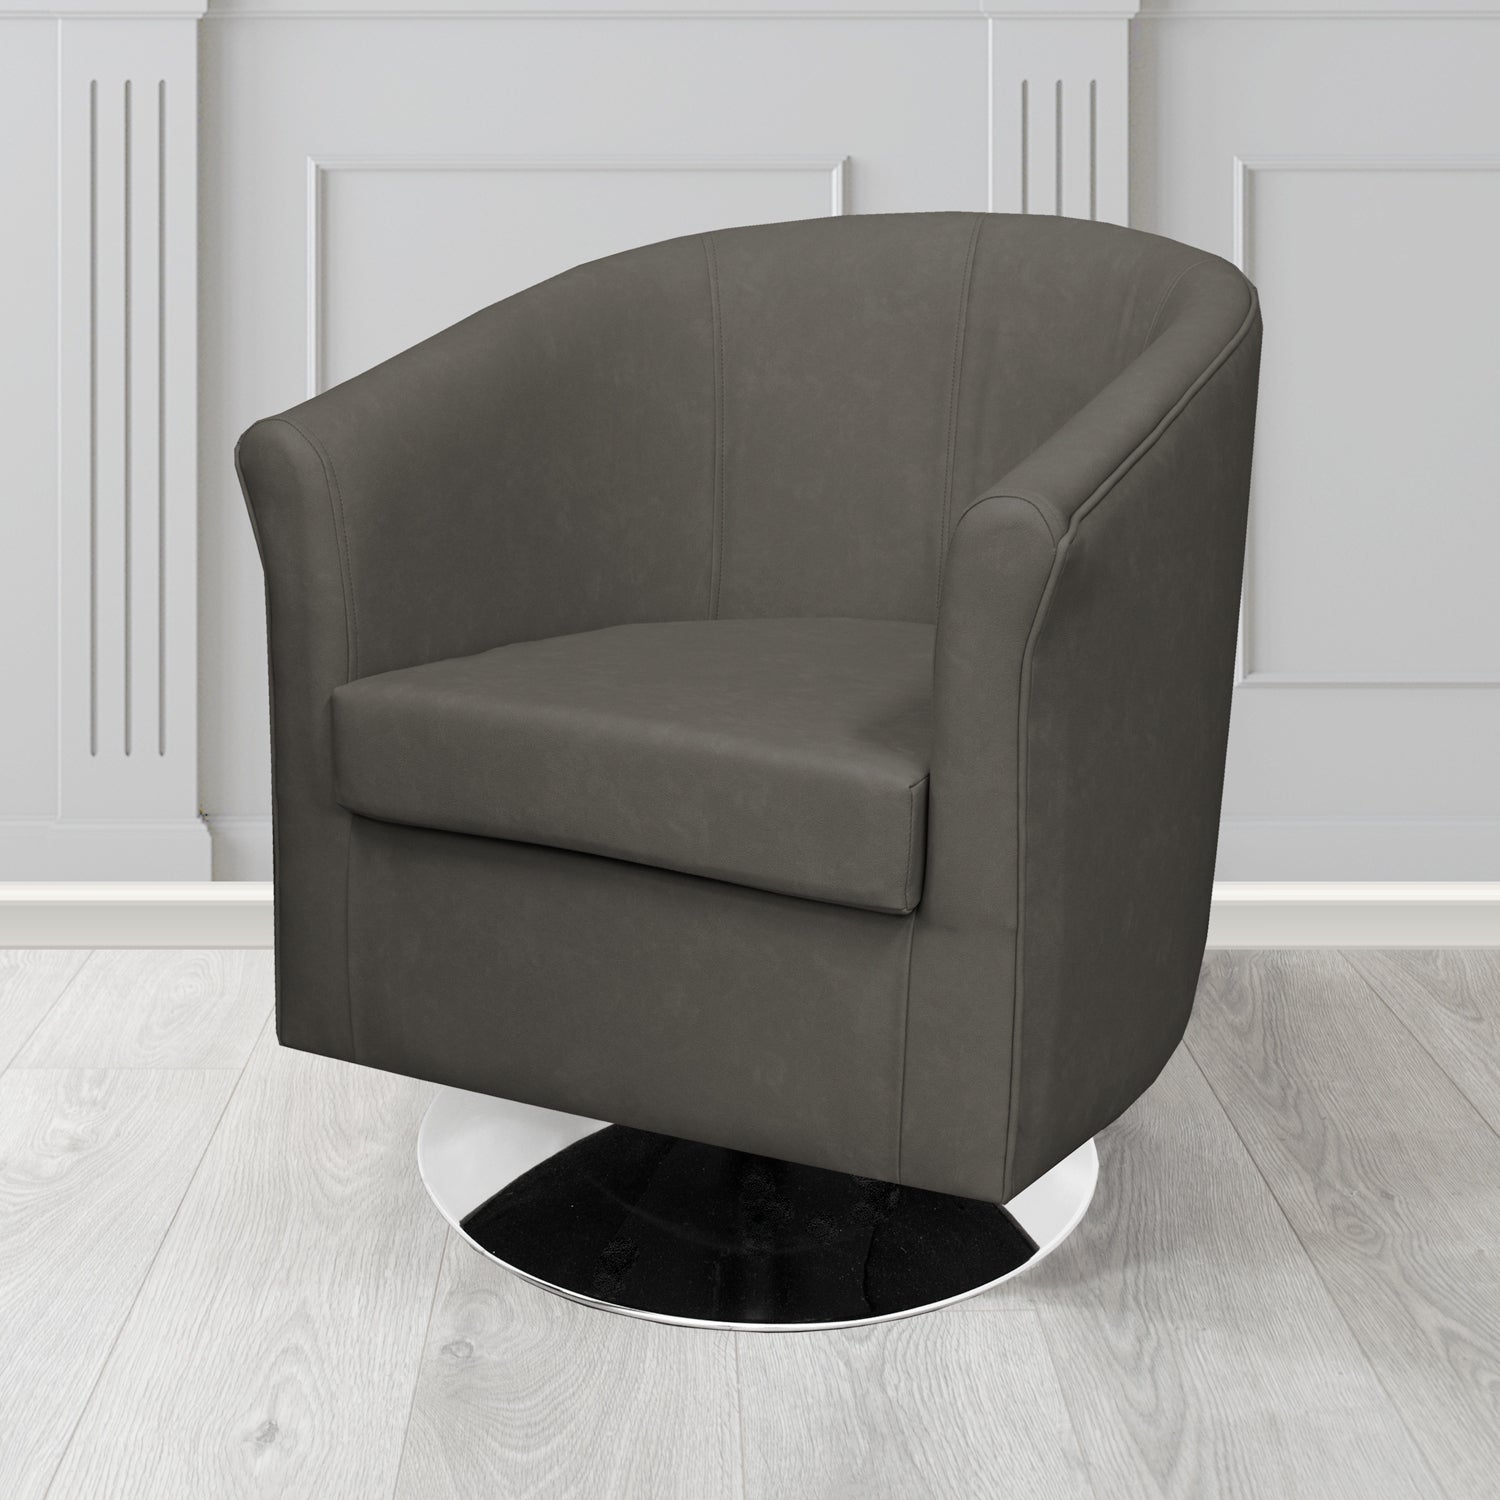 Tuscany Swivel Tub Chair in Infiniti Charcoal INF1861 Antimicrobial Crib 5 Faux Leather - The Tub Chair Shop